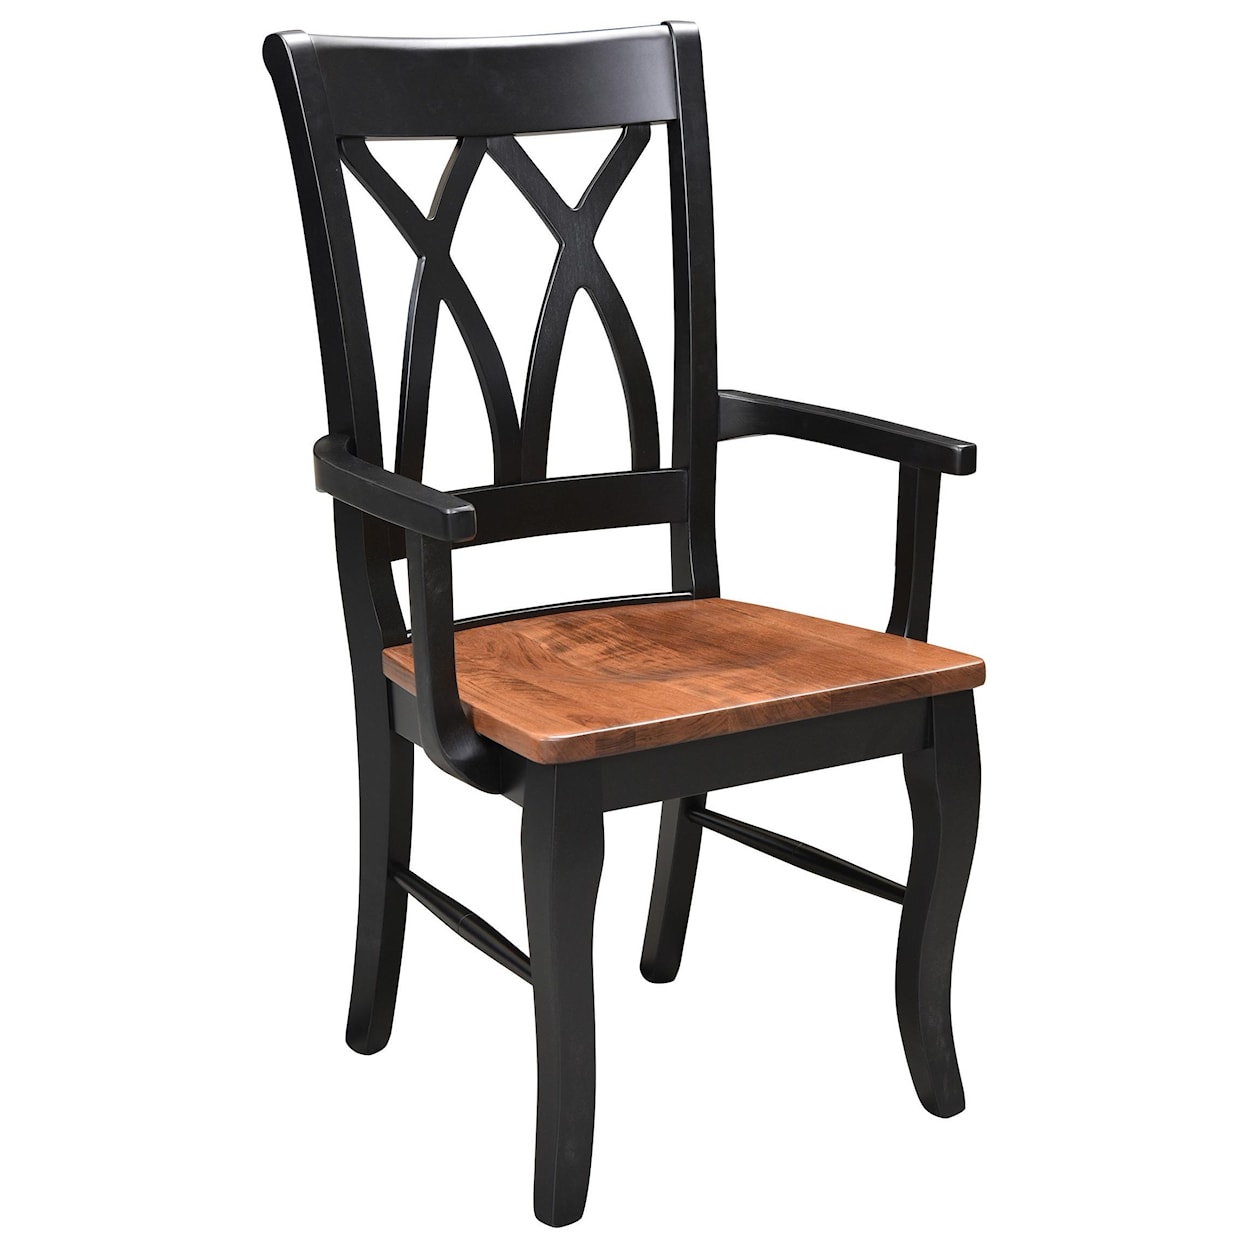 Wengerd Wood Products Stanton Arm Chair